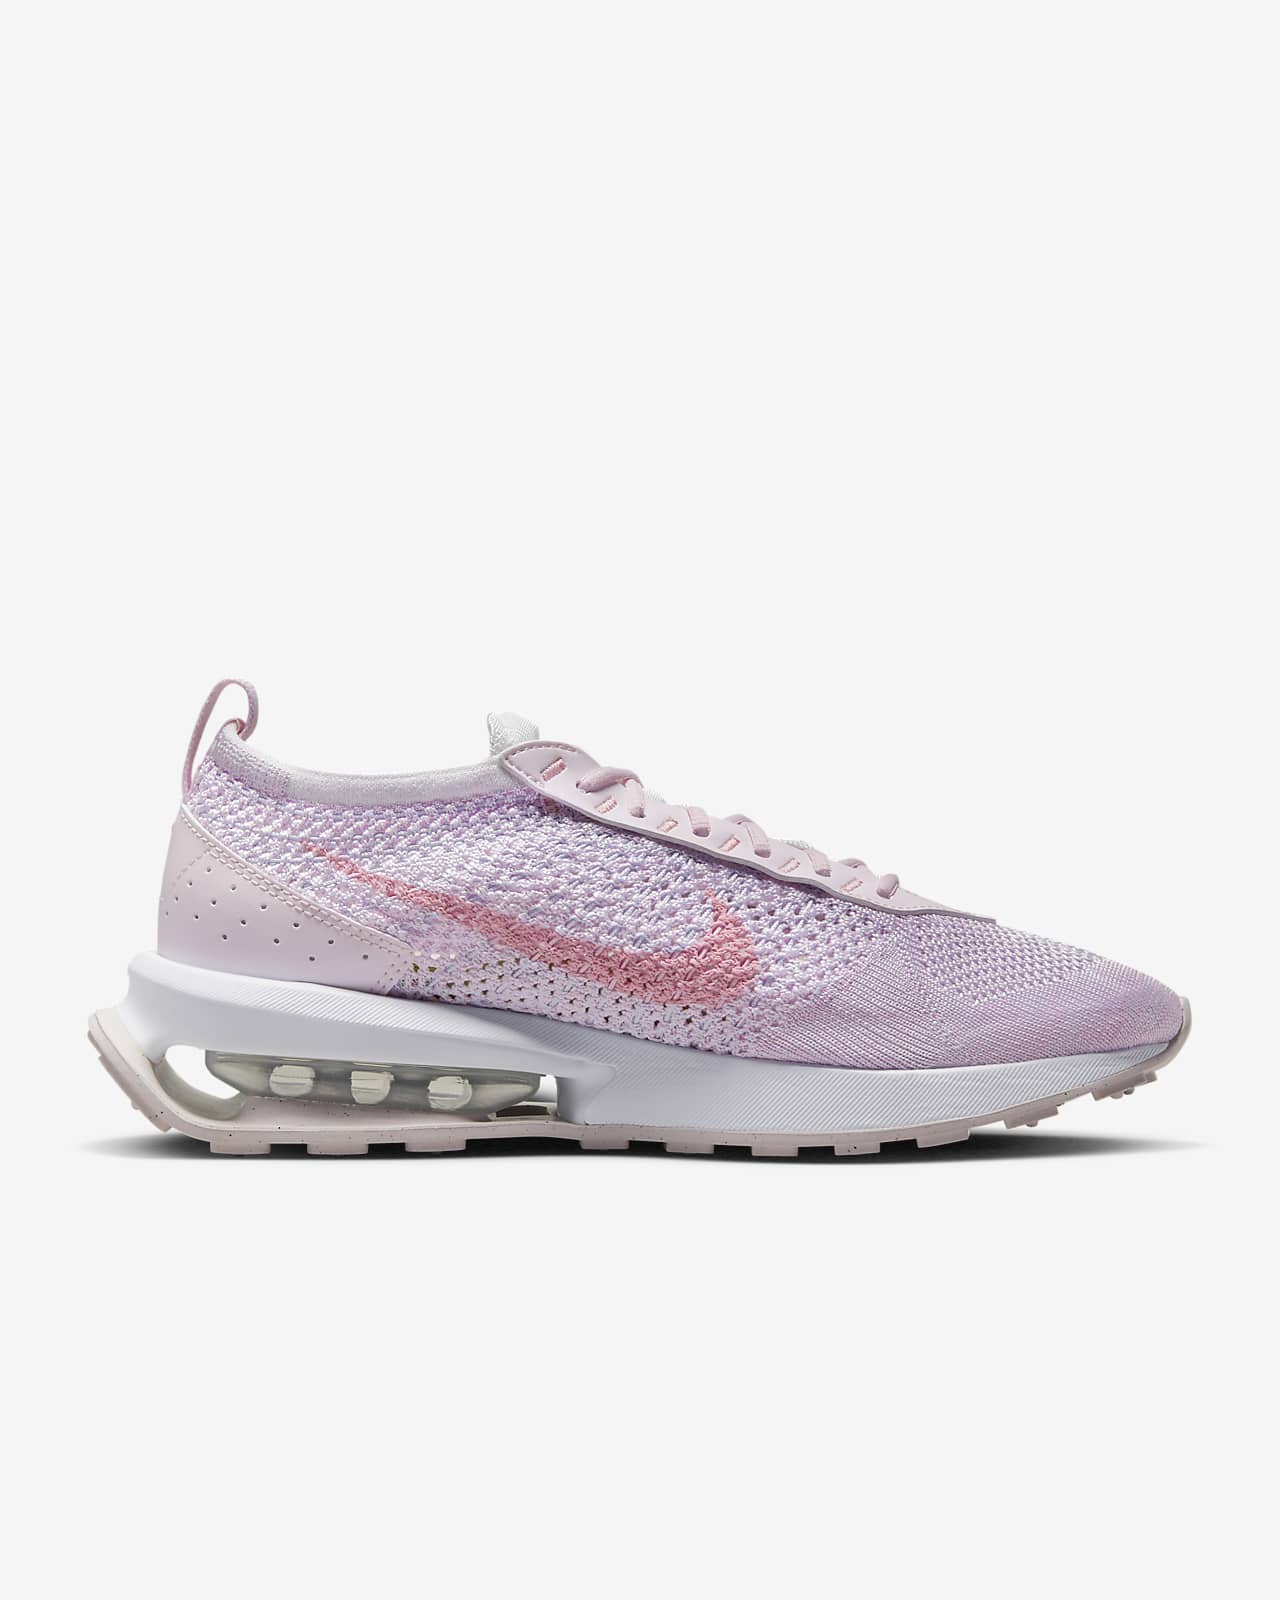 Nike Air Max Flyknit Racer Next Nature Women's Shoes.